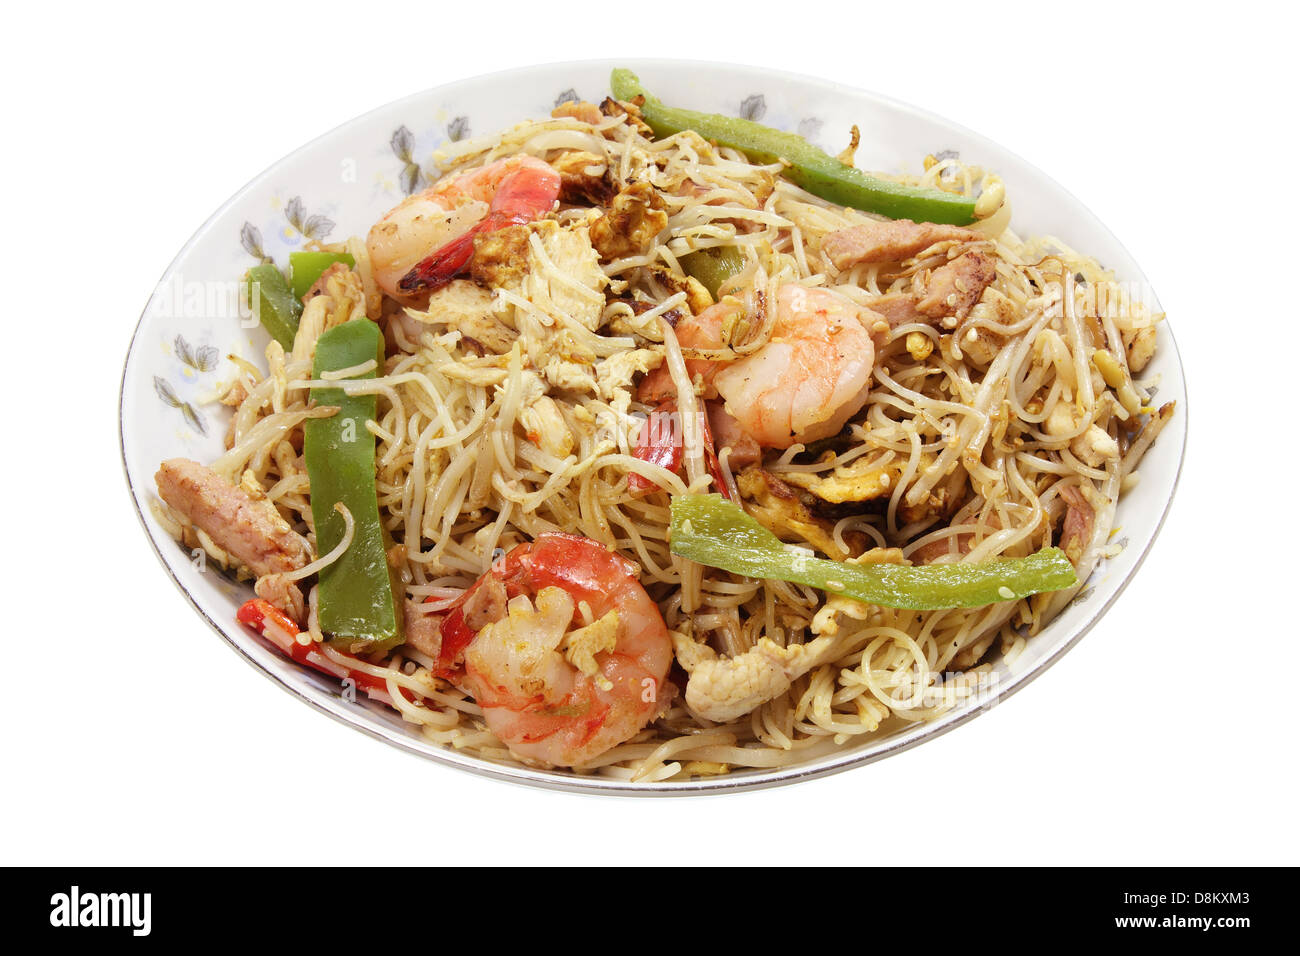 Fried rice and prawns Cut Out Stock Images & Pictures - Alamy